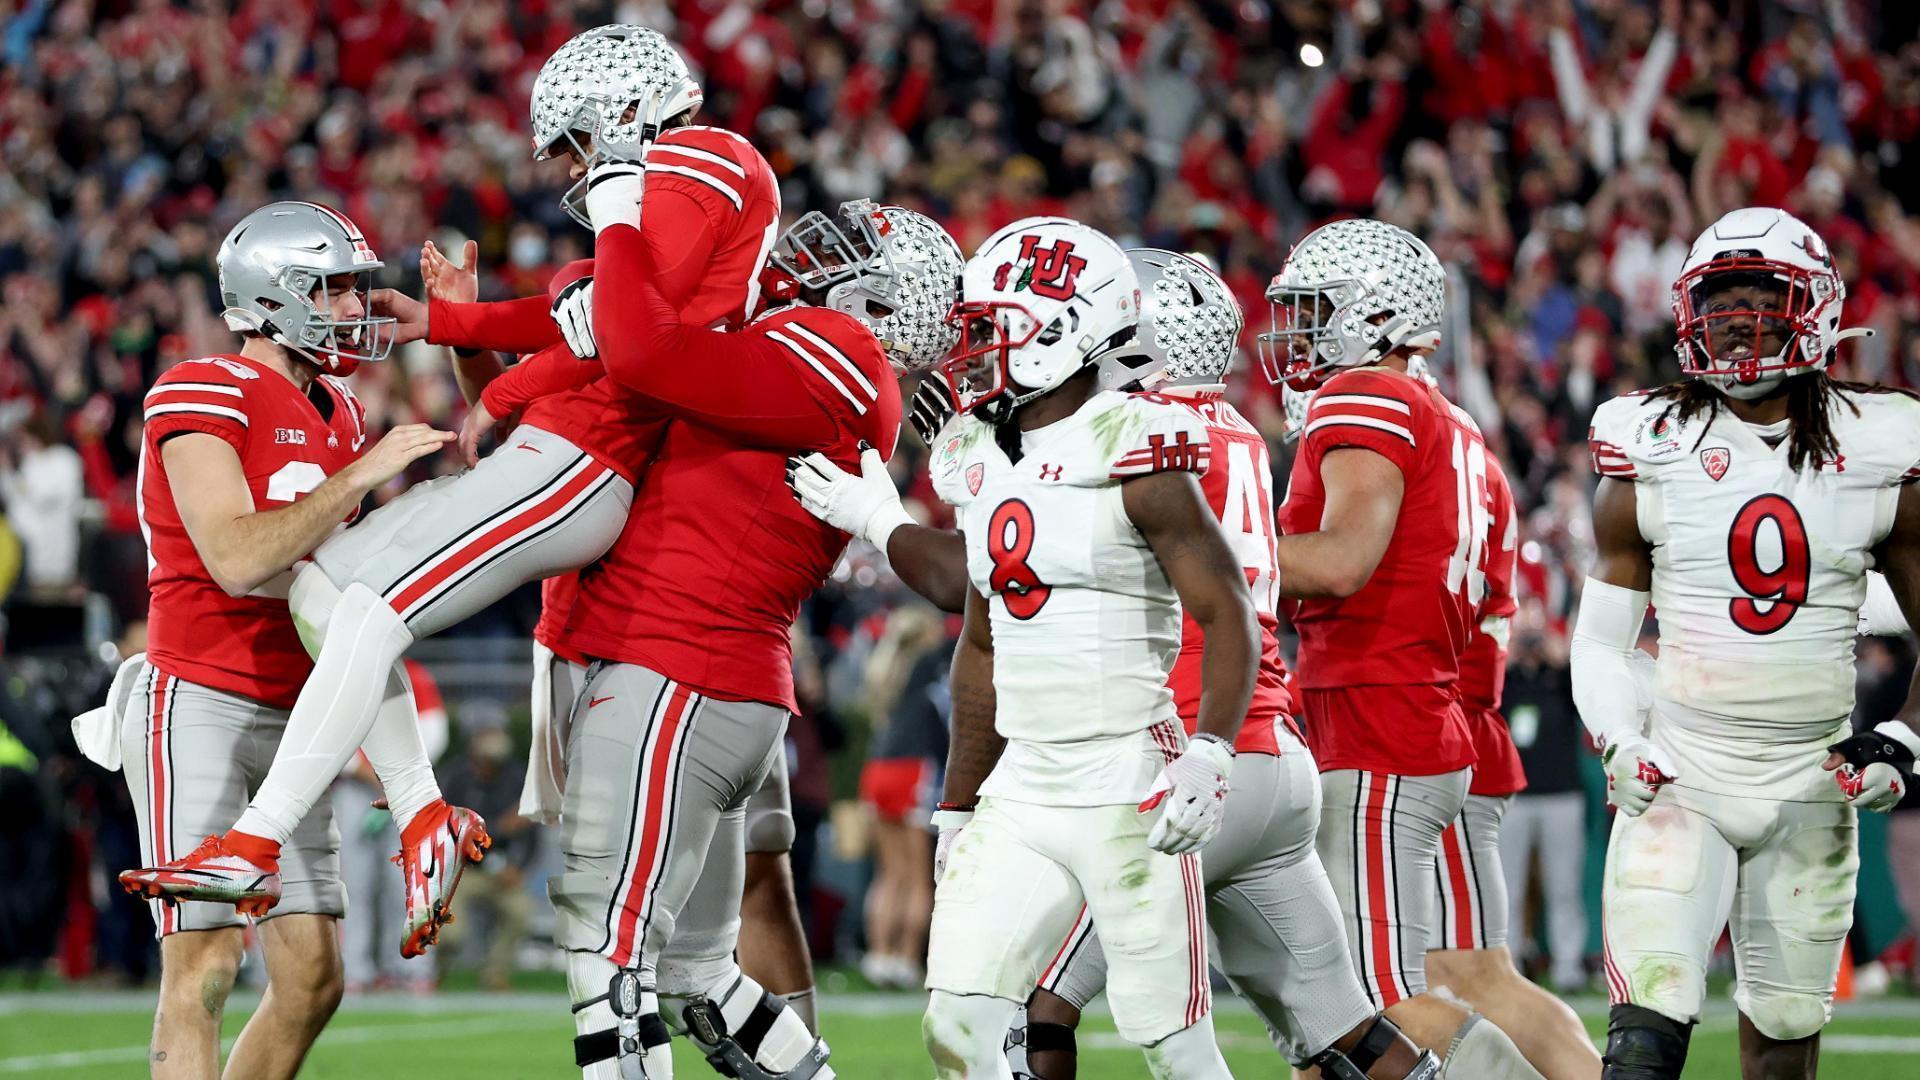 ESPN Brings Extensive On-Site Studio Programming to the College Football  Playoff Semifinals and Rose Bowl Presented by Prudential - ESPN Press Room  U.S.